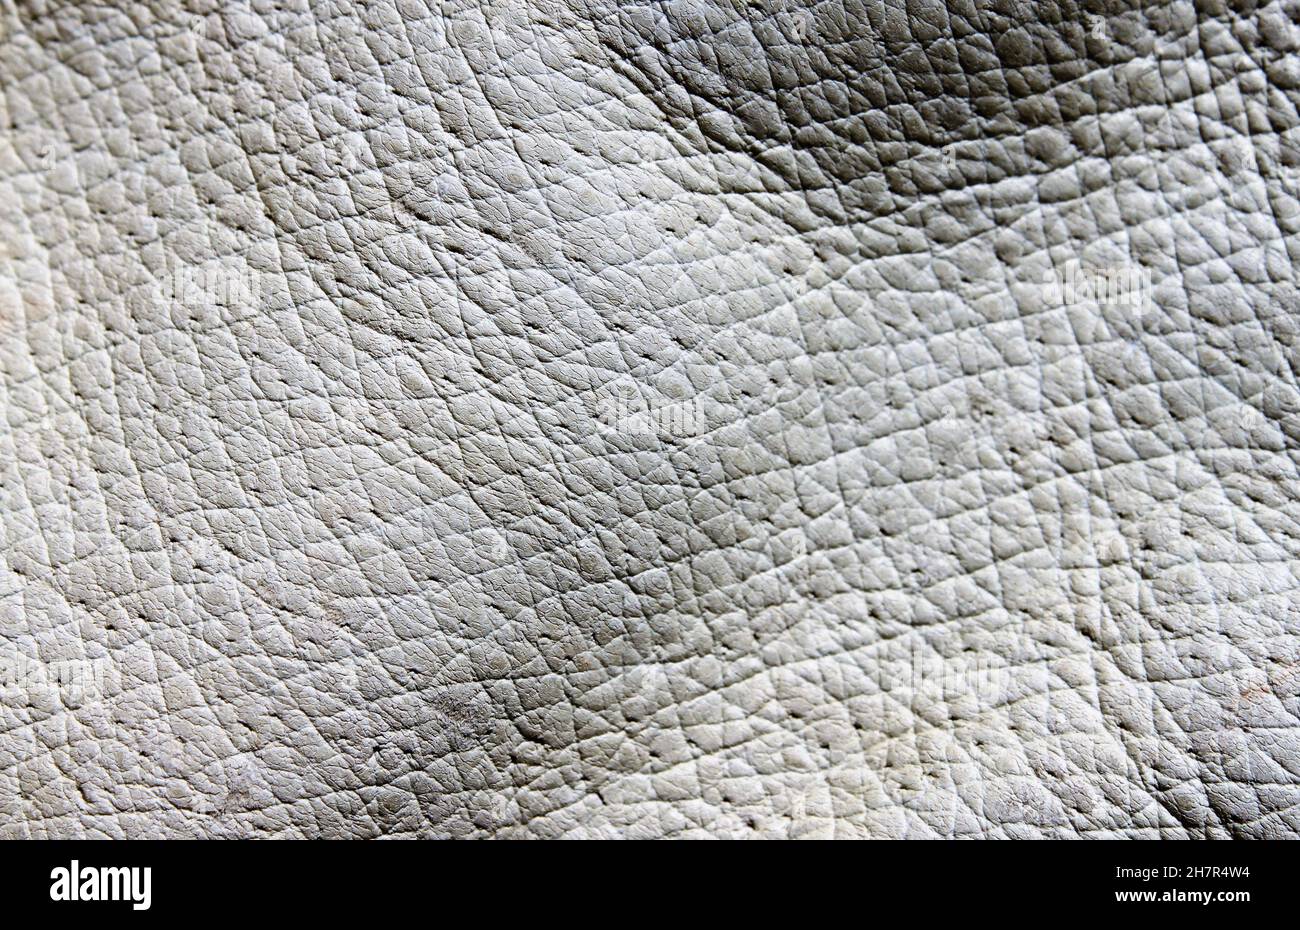 a leather light gray surface close up Stock Photo